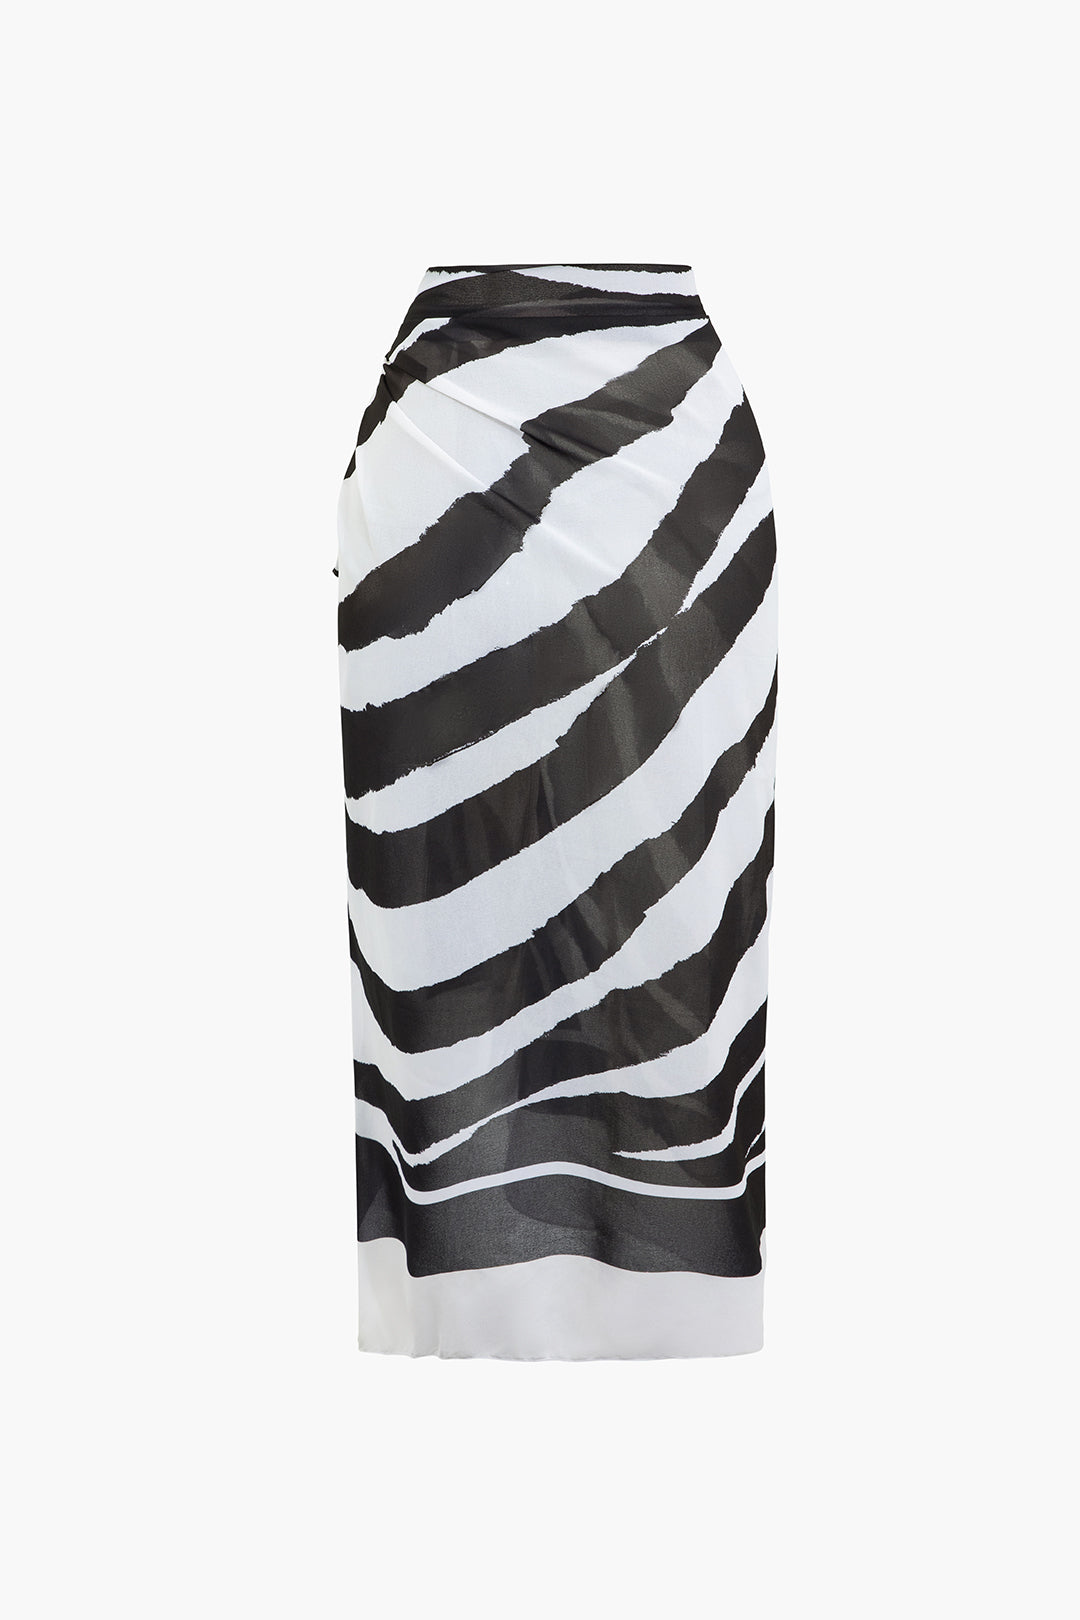 Abstract Print Knot Wrap Cover Up Skirt